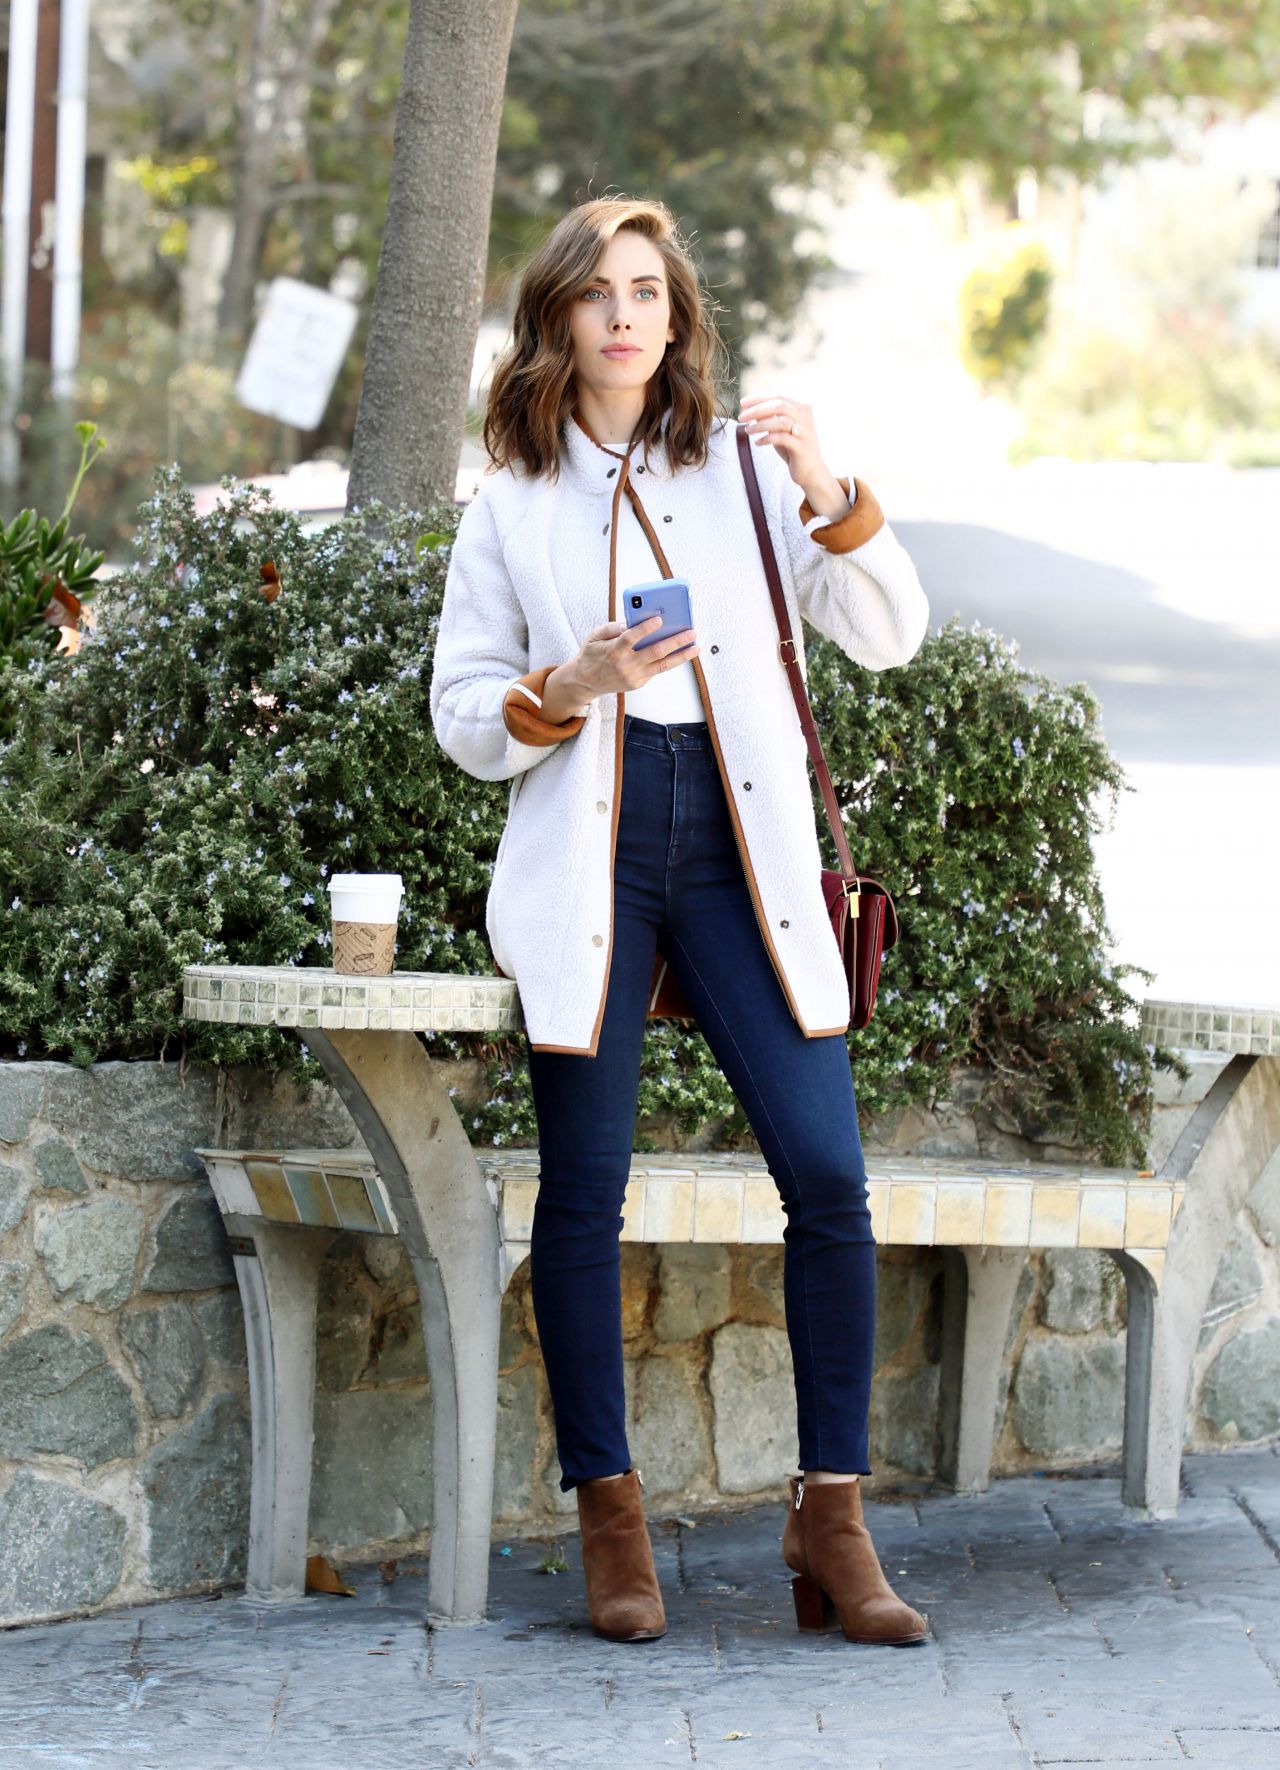 alison-brie-at-a-market-in-los-angeles-10-15-2018-5.jpg